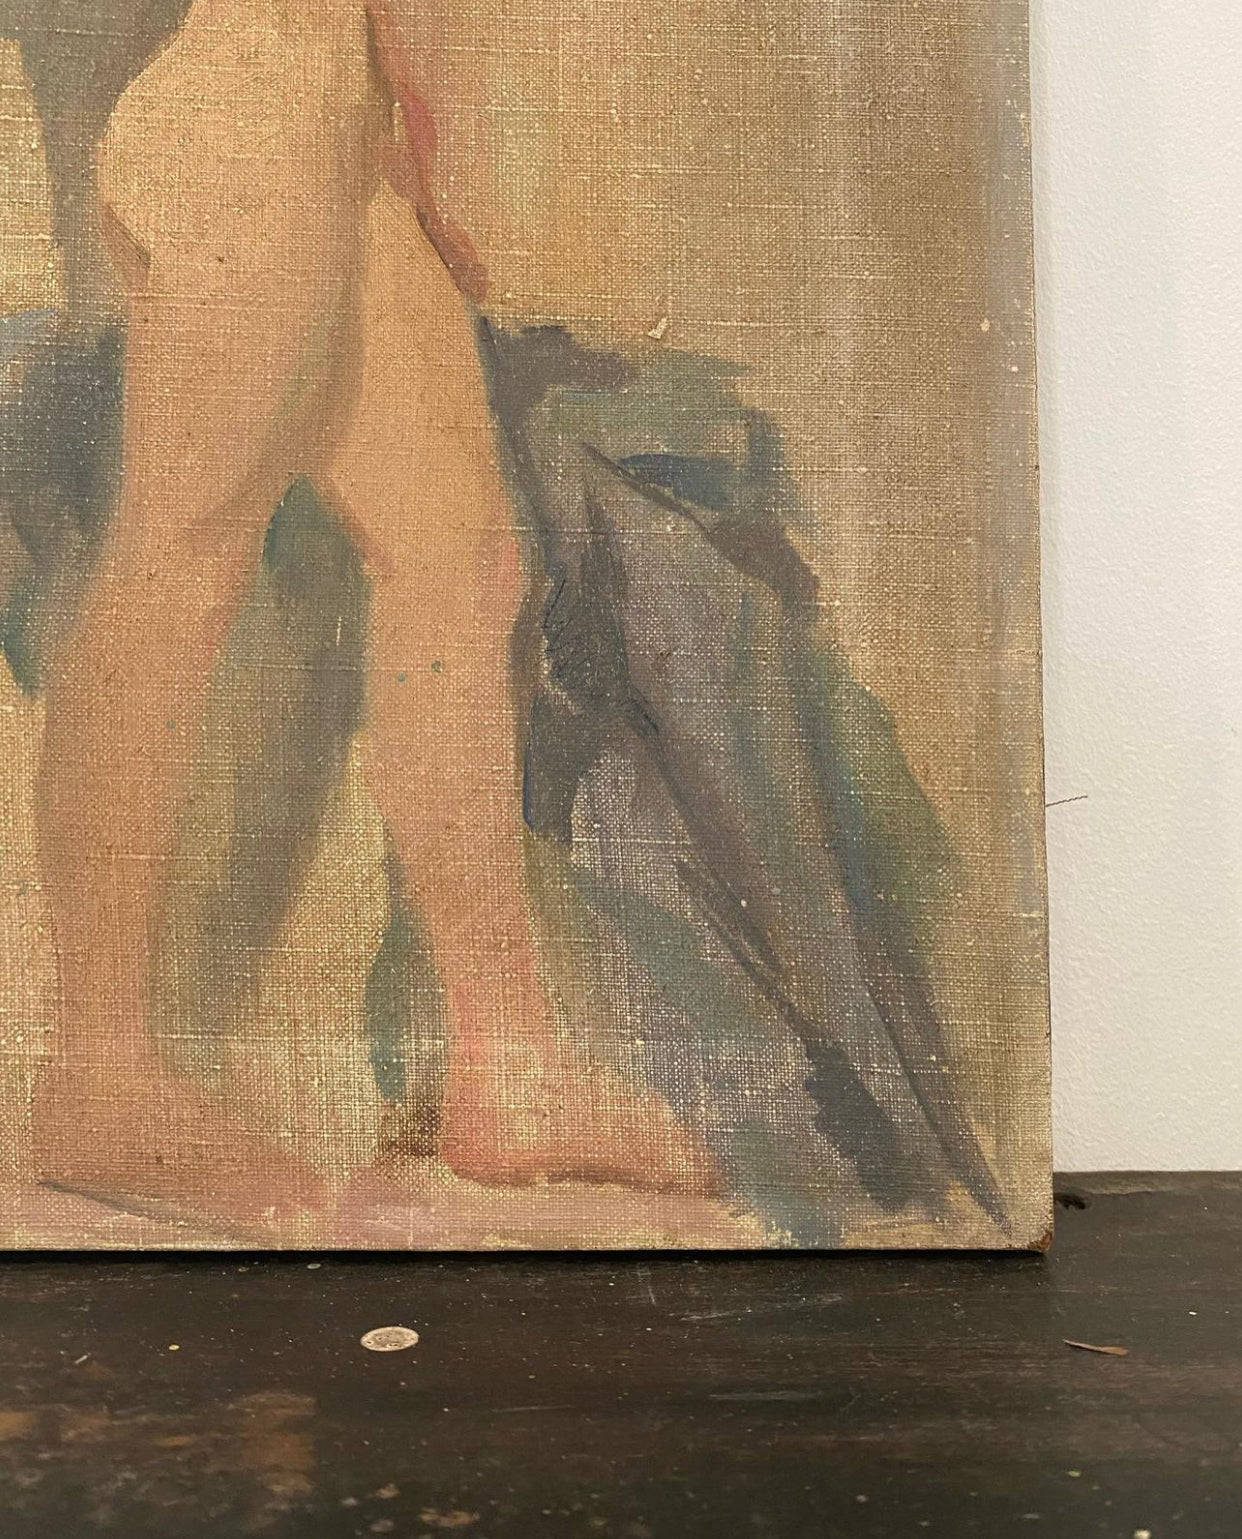 Antique 1920s/1930s Nude Oil Painting On Canvas- 12x16”